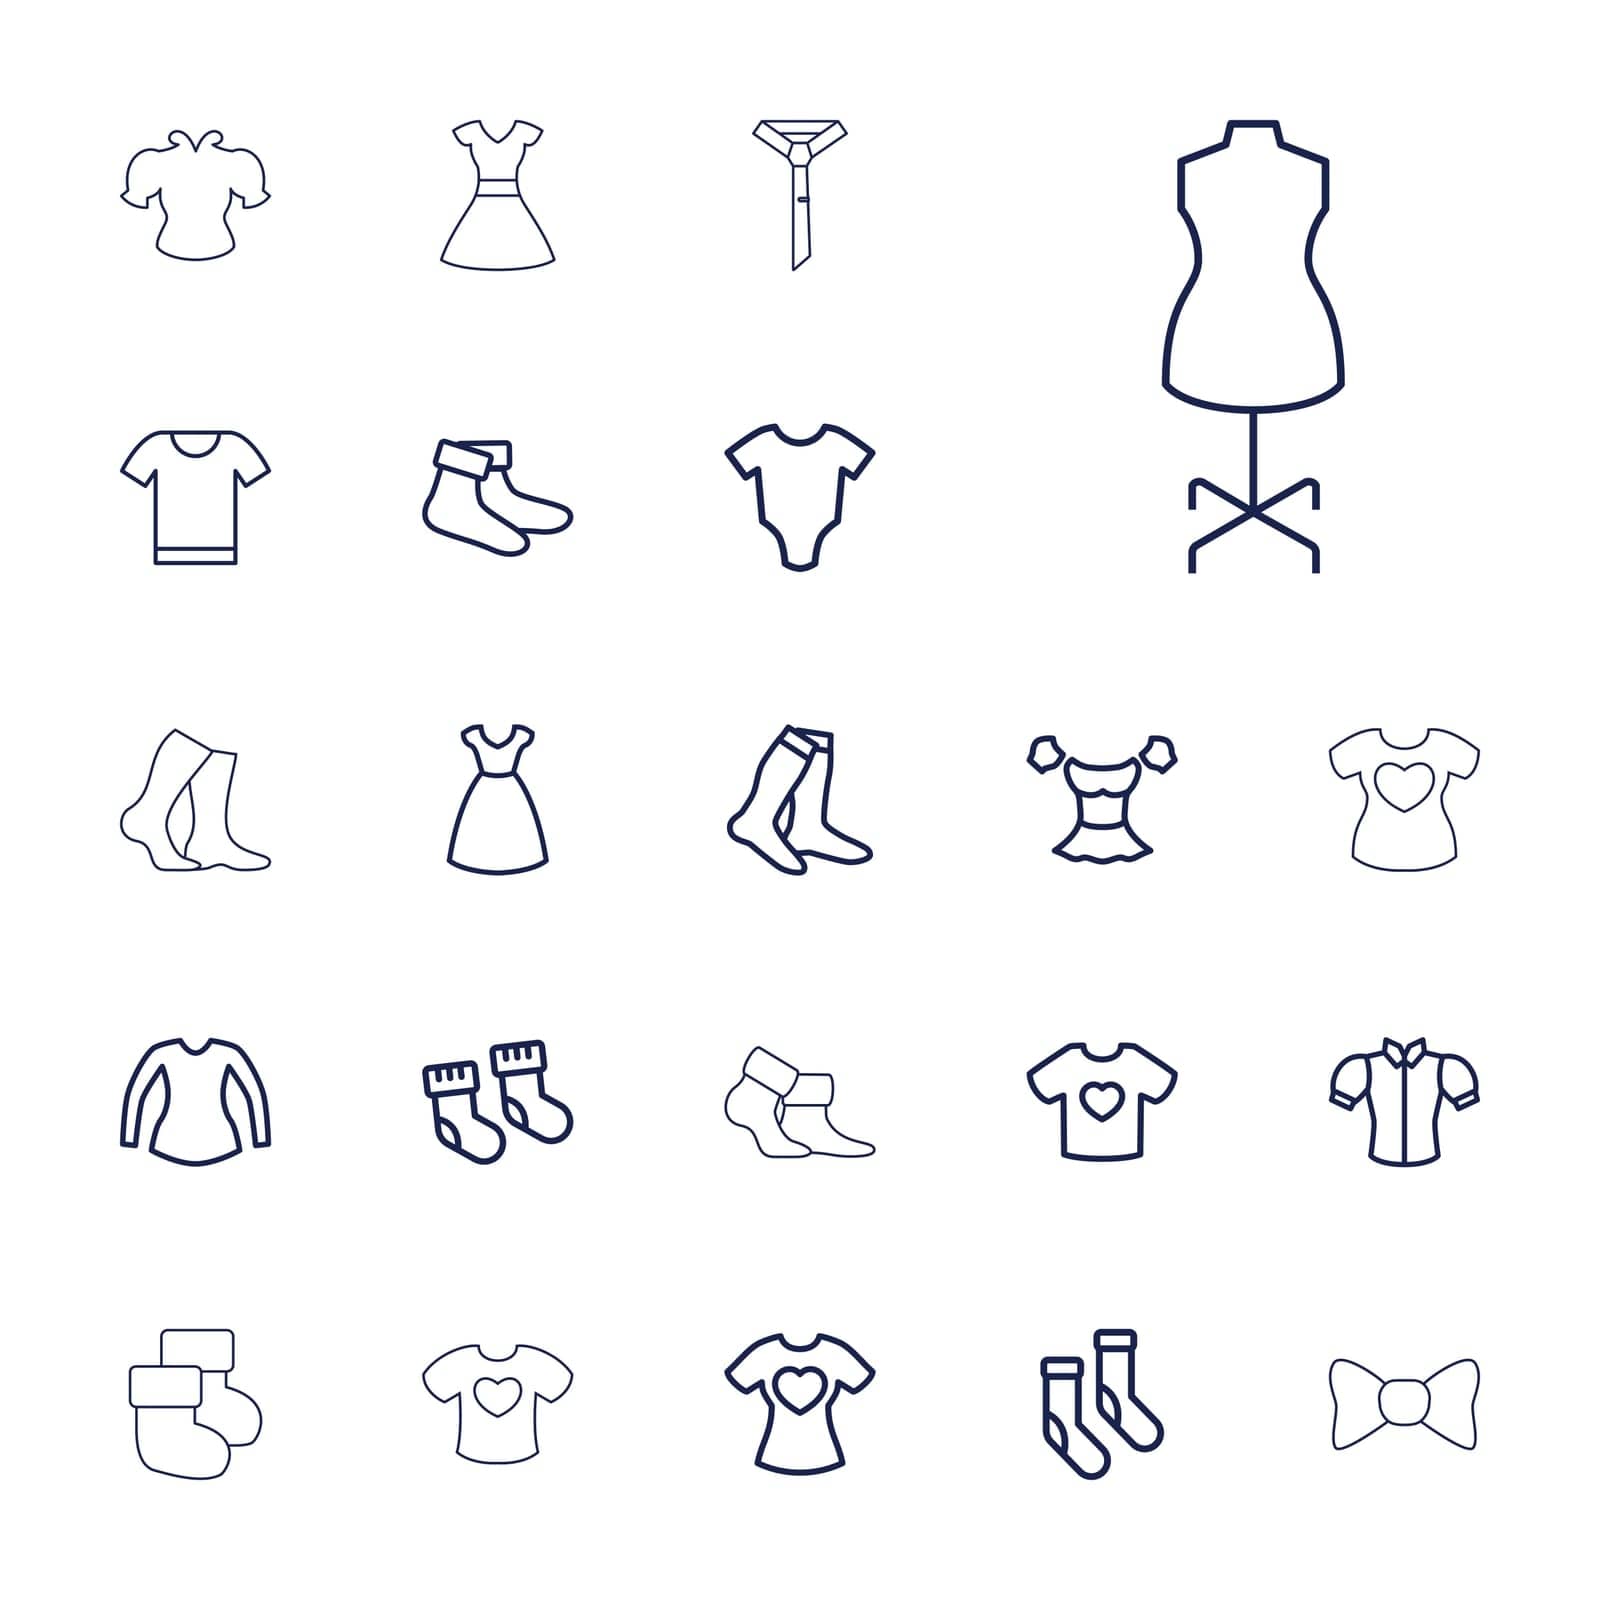 dress,symbol,mannequin,icon,isolated,wear,cotton,apparel,bow,cute,onesie,tie,white,design,garment,vector,female,graphic,foot,set,blouse,cartoon,socks,textile,heart,with,elegance,shirt,t,background,silhouette,baby,style,clothing,illustration,sketch,object,fashion by ogqcorp